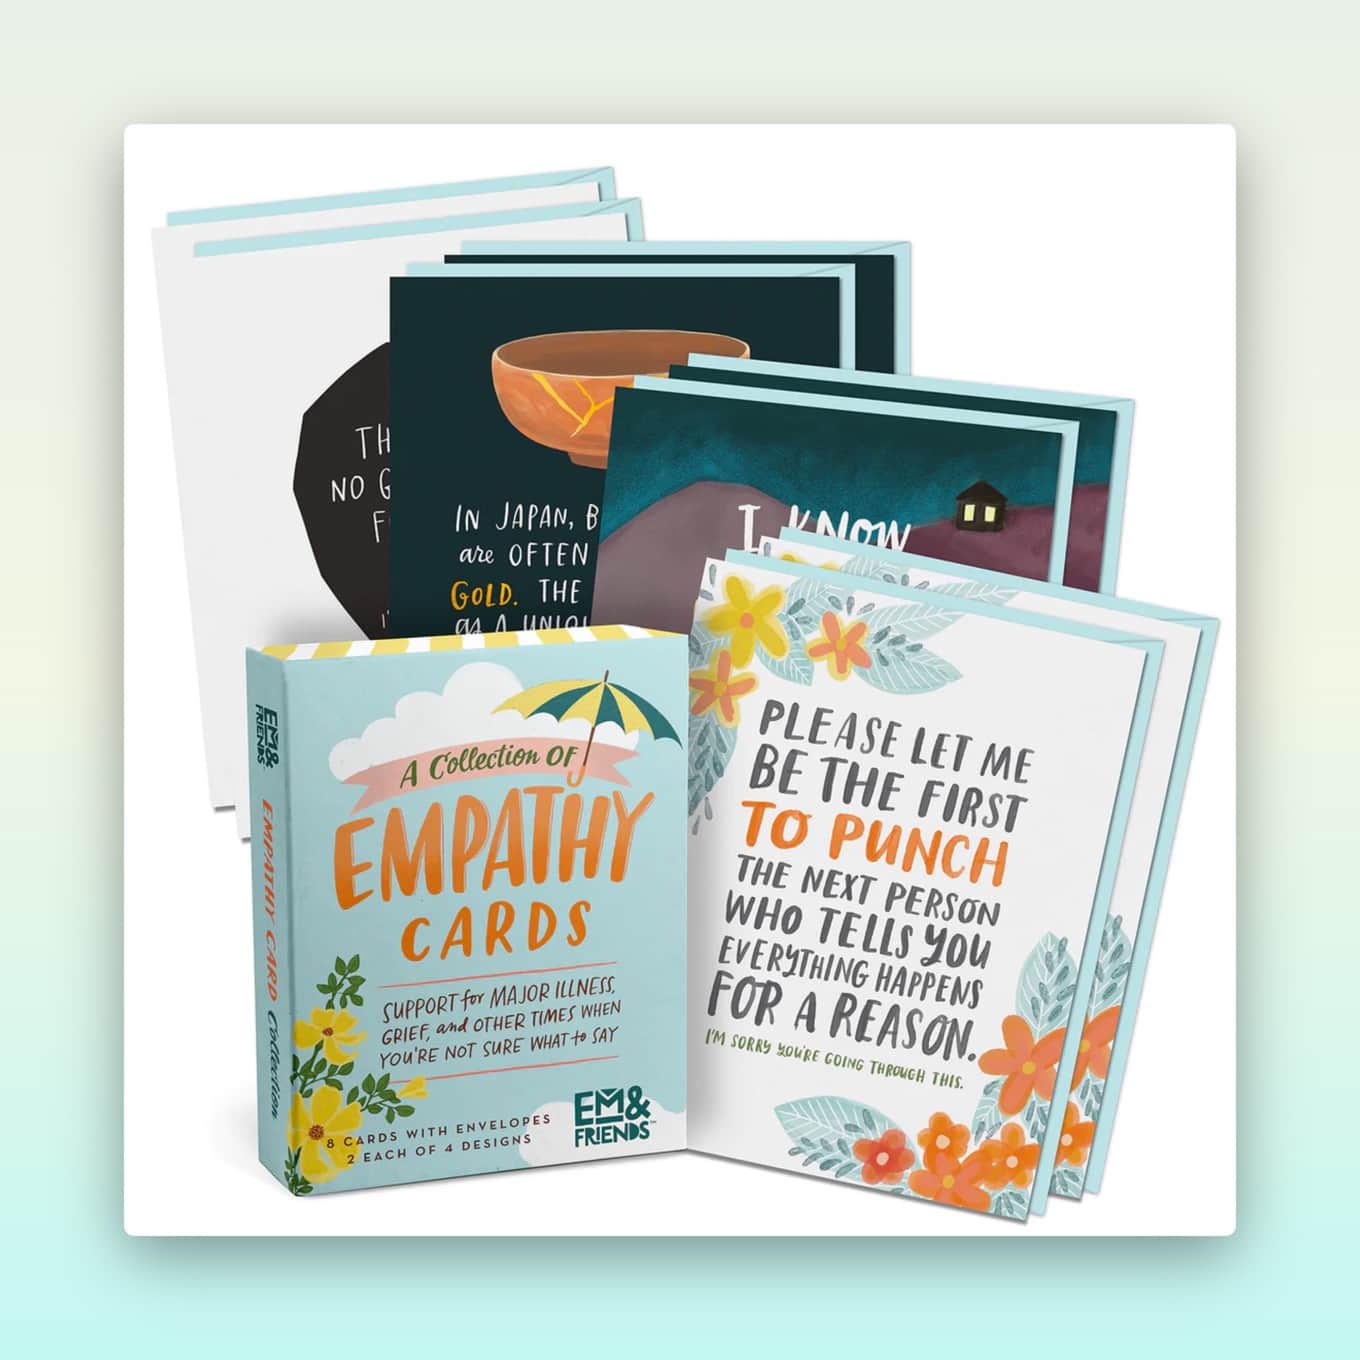 Sustainably-made Empathy Cards from Em & Friends